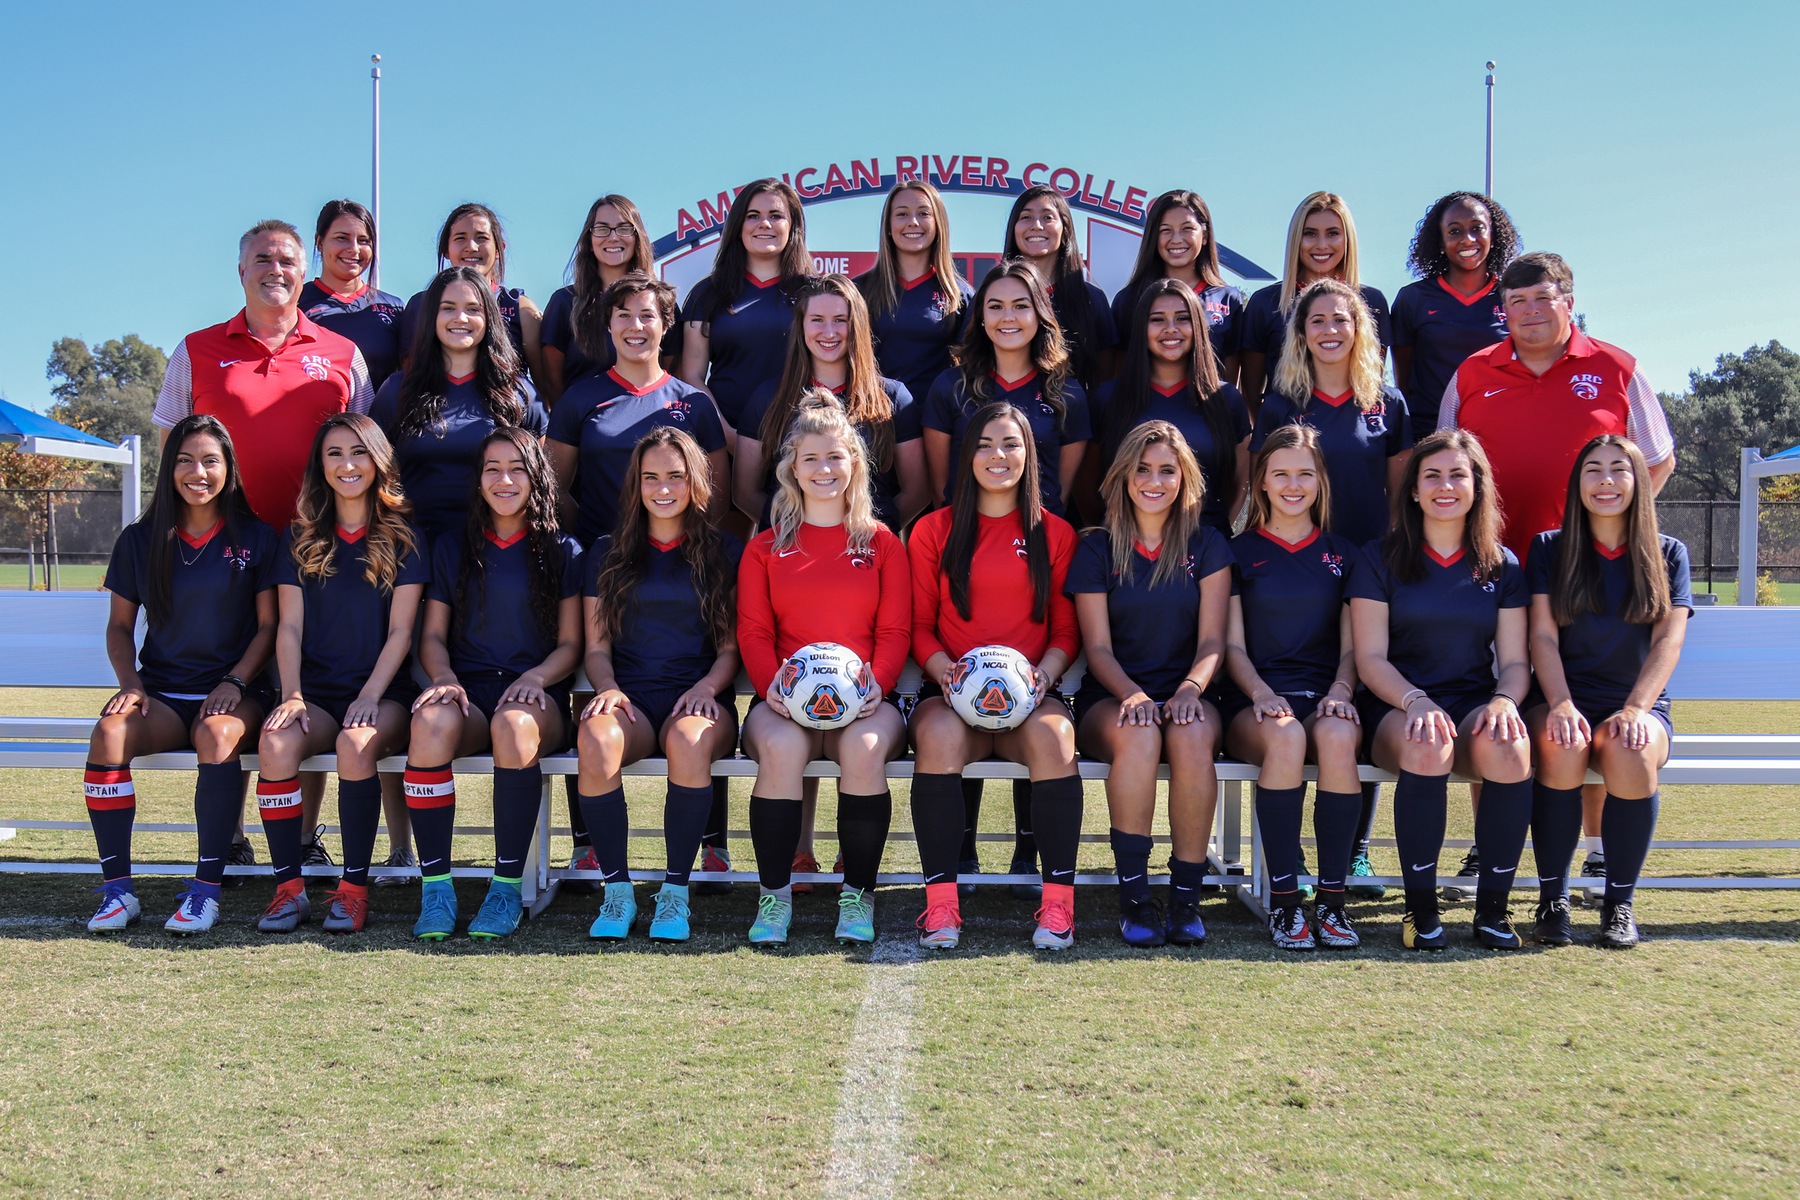 Women's Soccer team picture